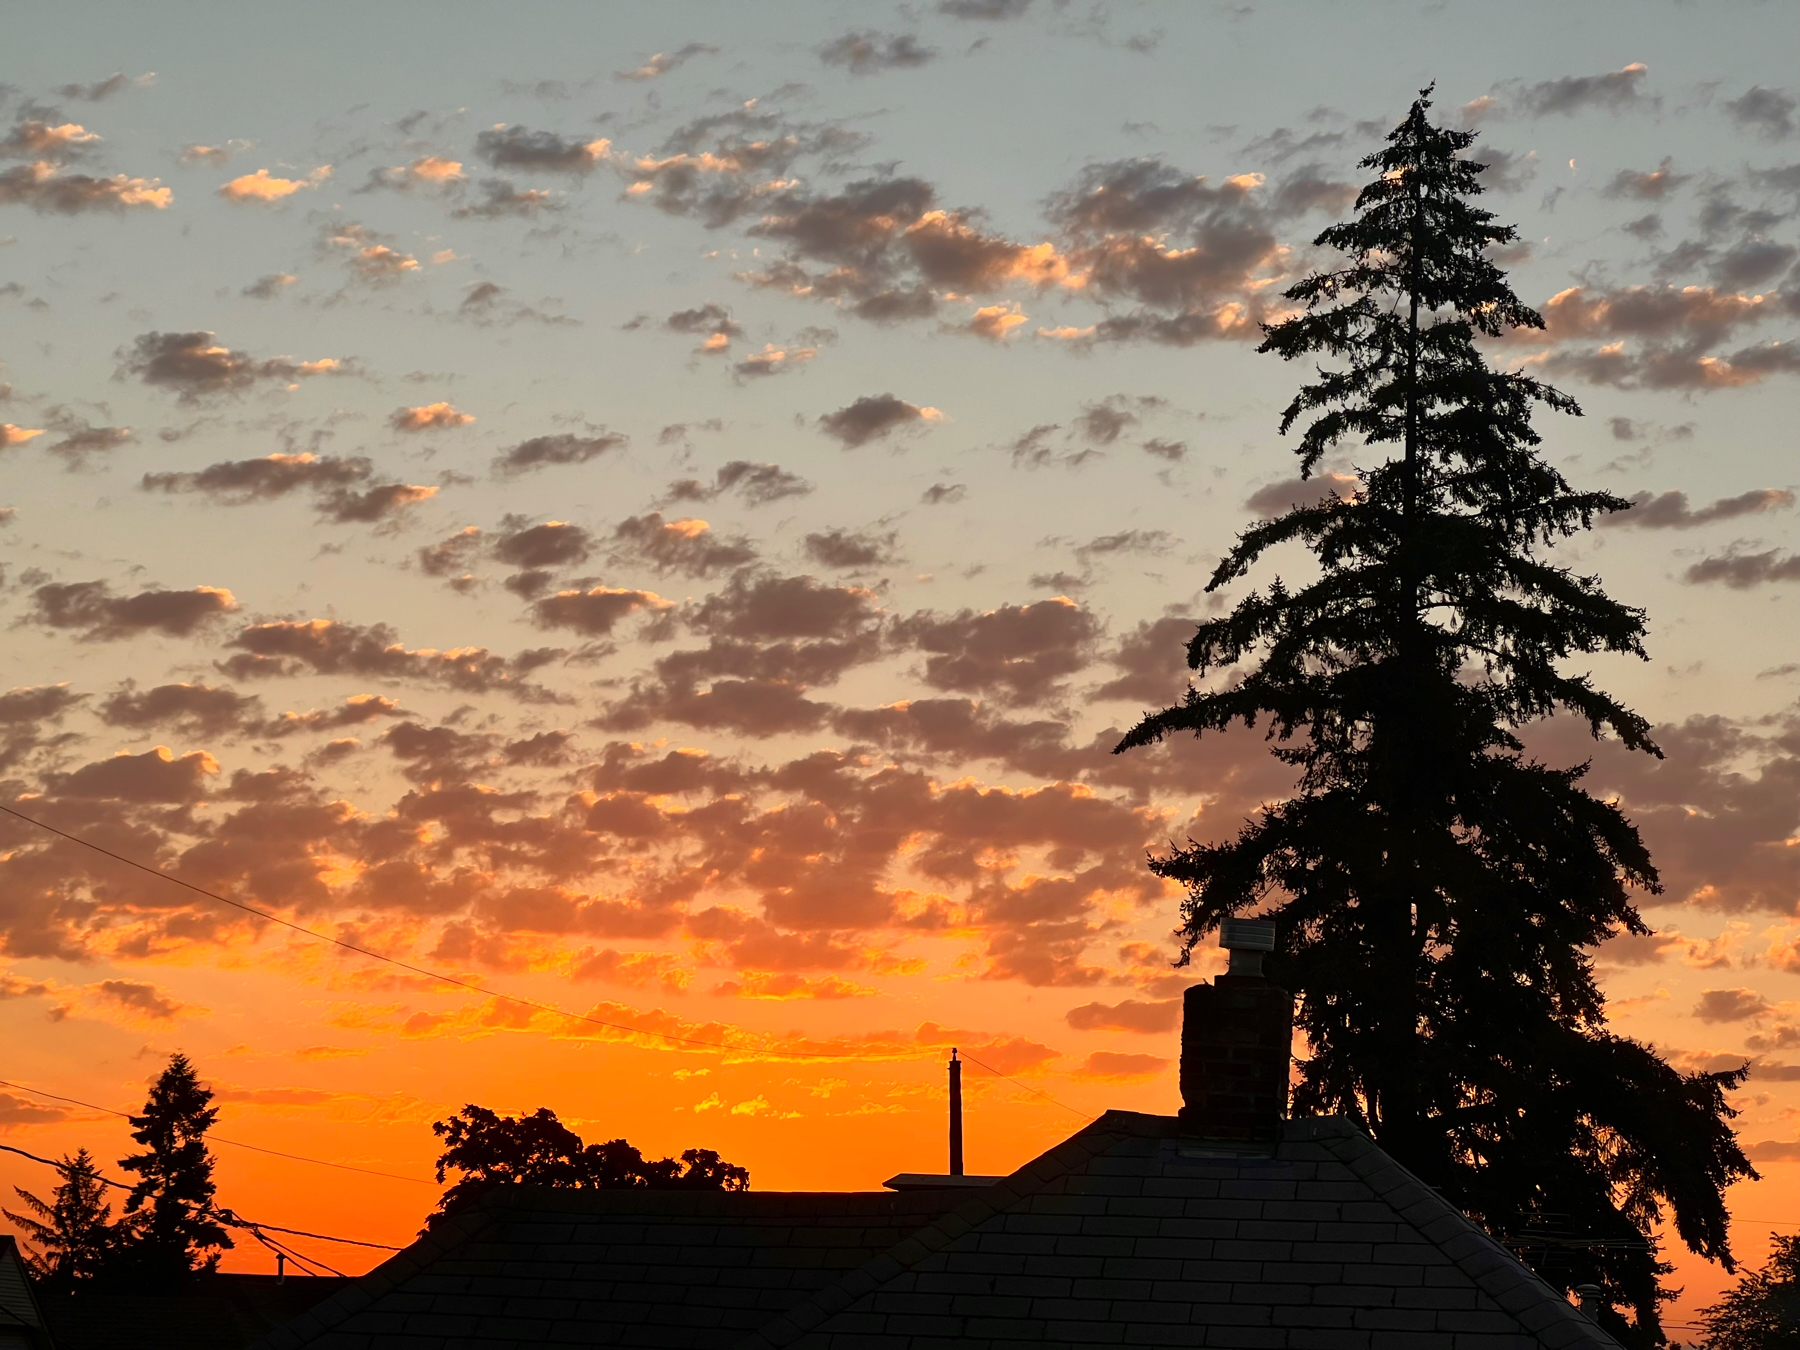 Sunrise with patchy clouds and gradients of red, orange, yellow, gold, blue with silhouetted trees and houses in the lower foreground.